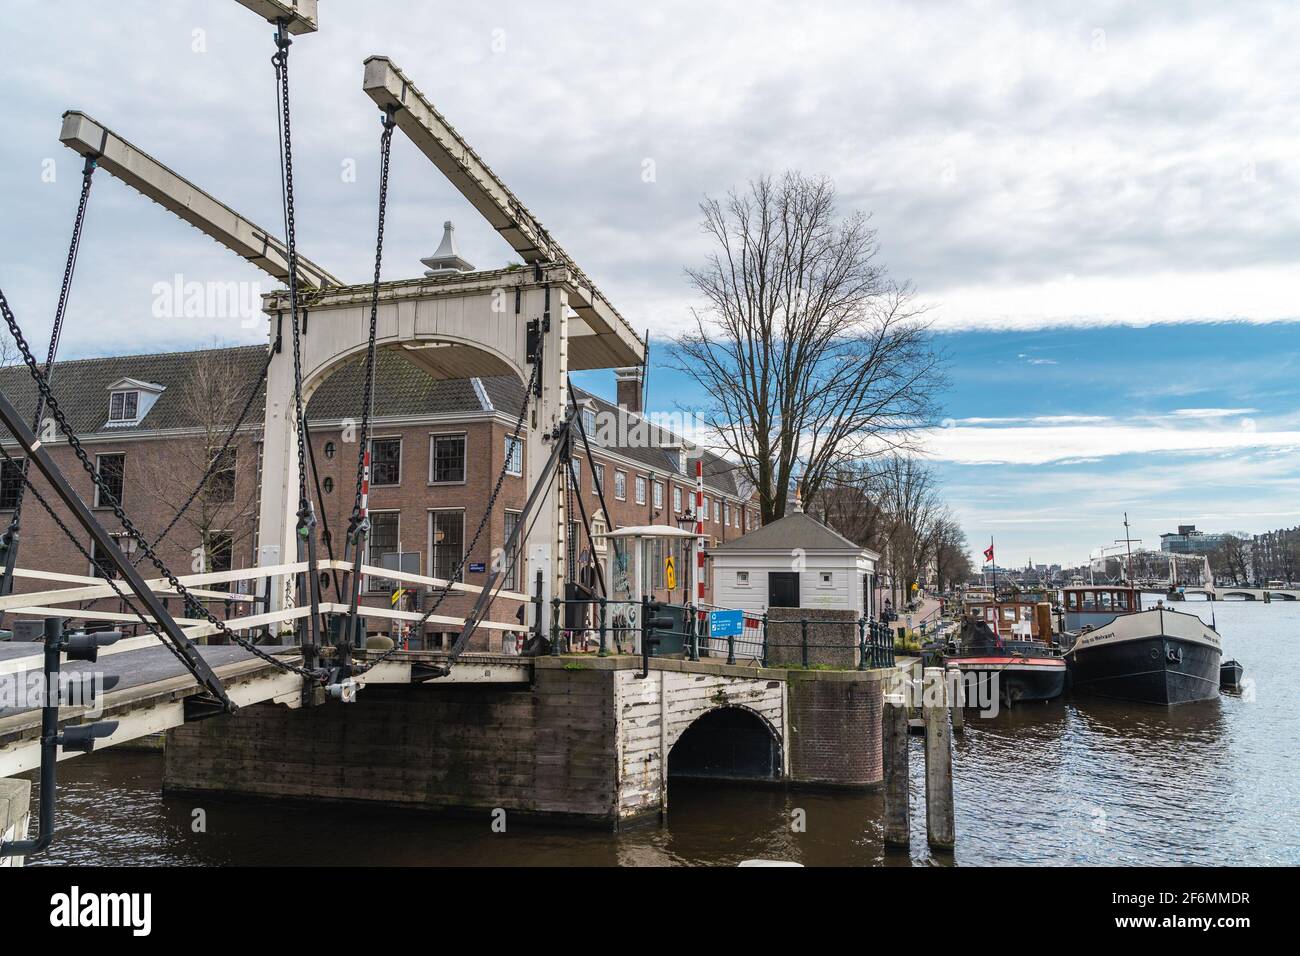 Amsterdam, Netherlands - March 2020: Magere Brug or Skinny Bridge on Amstel river, bascule bridge made of white-painted wood. Stock Photo